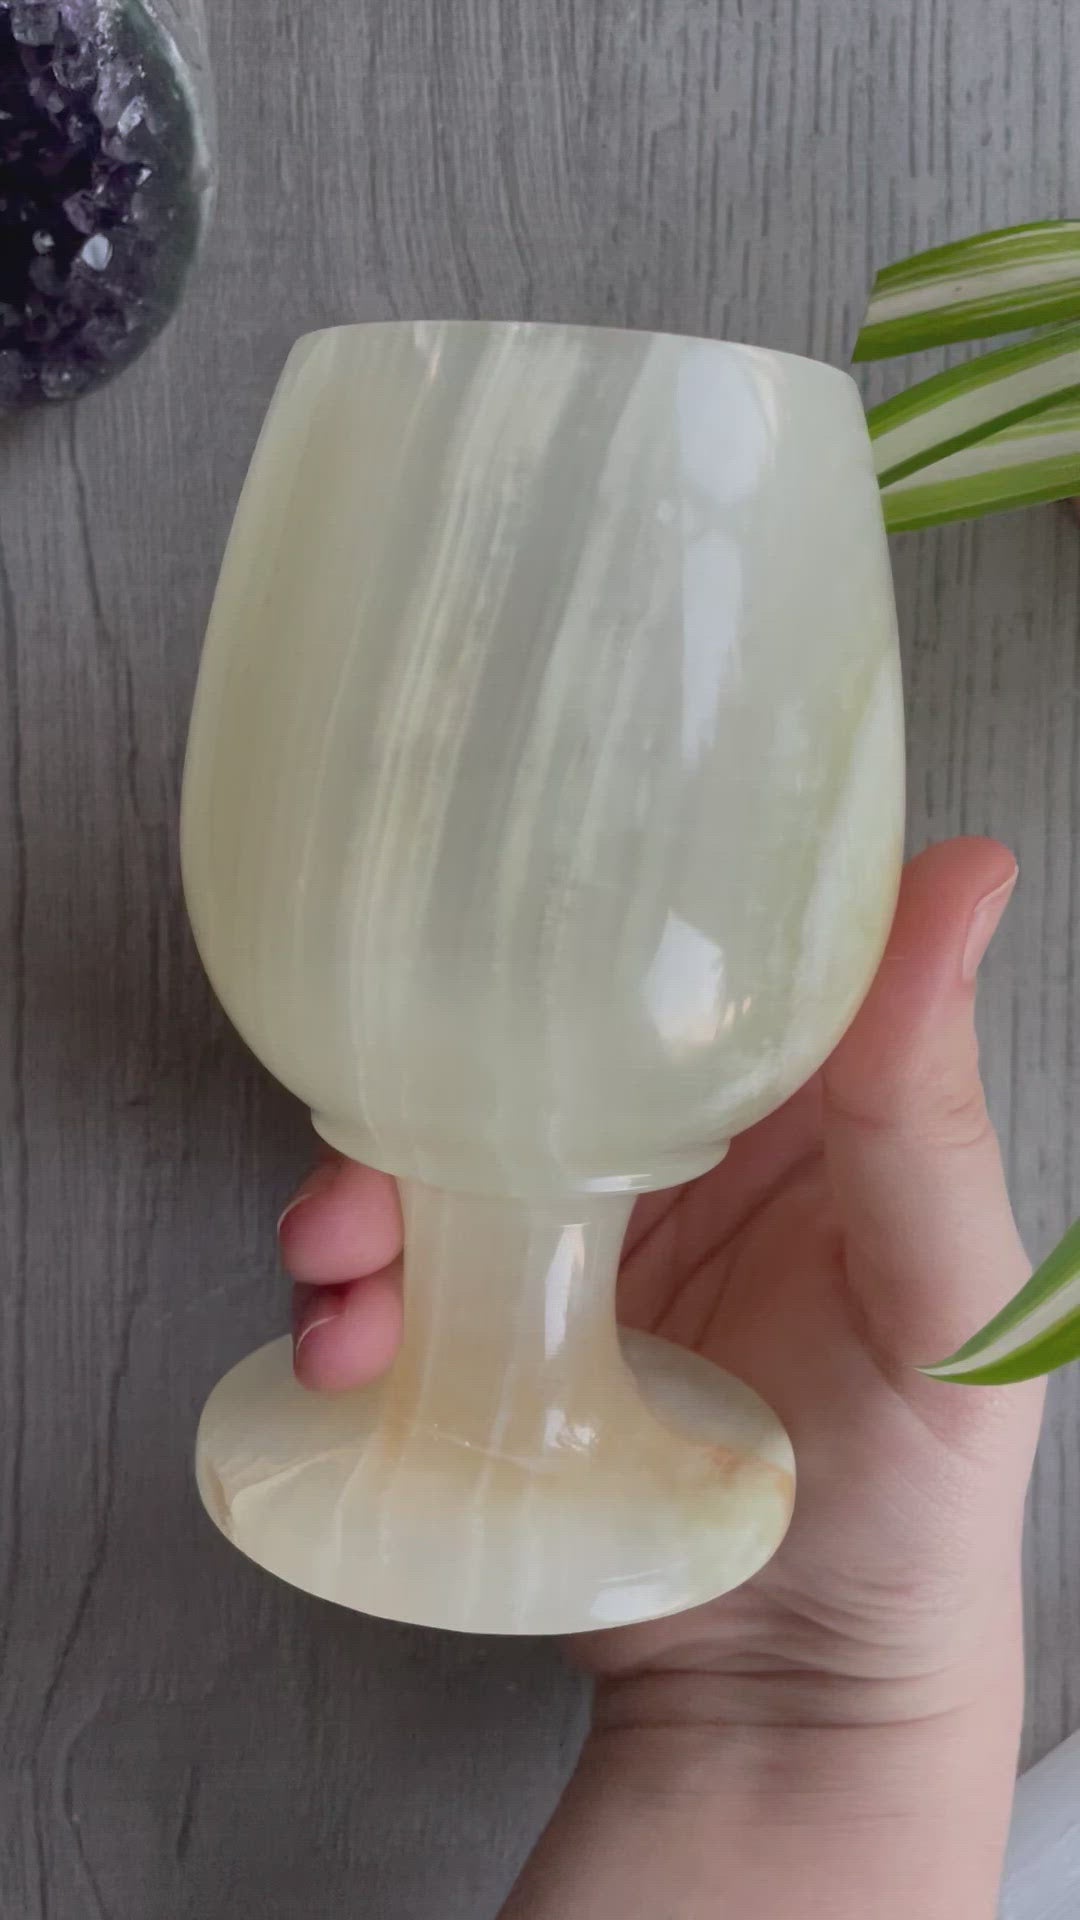 Pictured is a green onyx snifter.